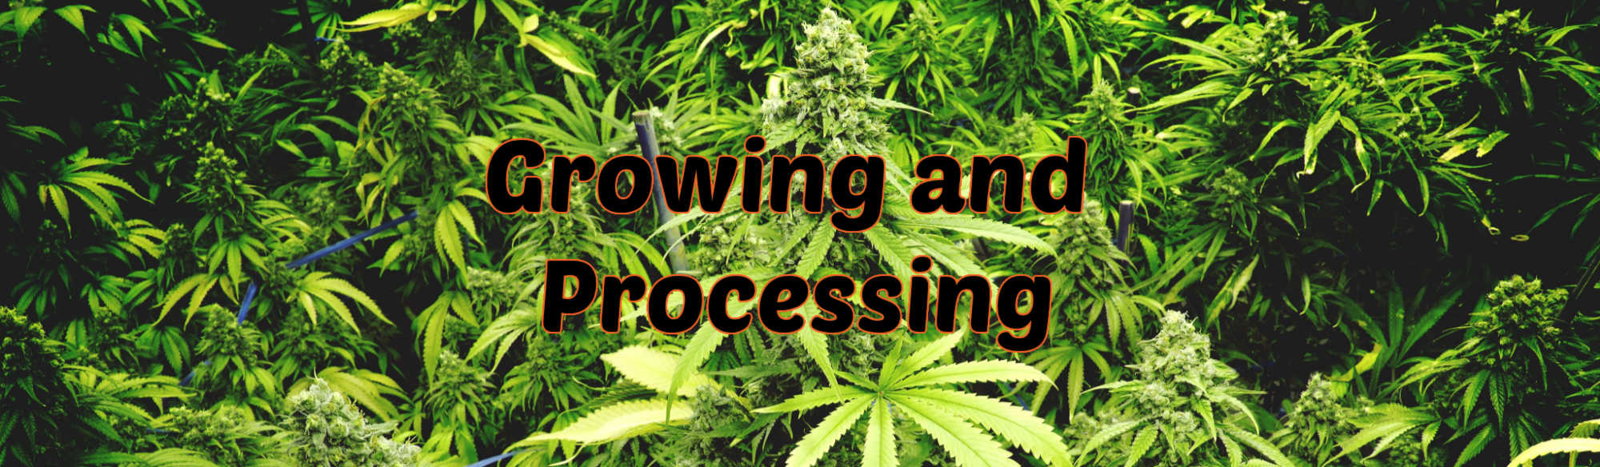 image of bubble gum cannabis strain growing and processing